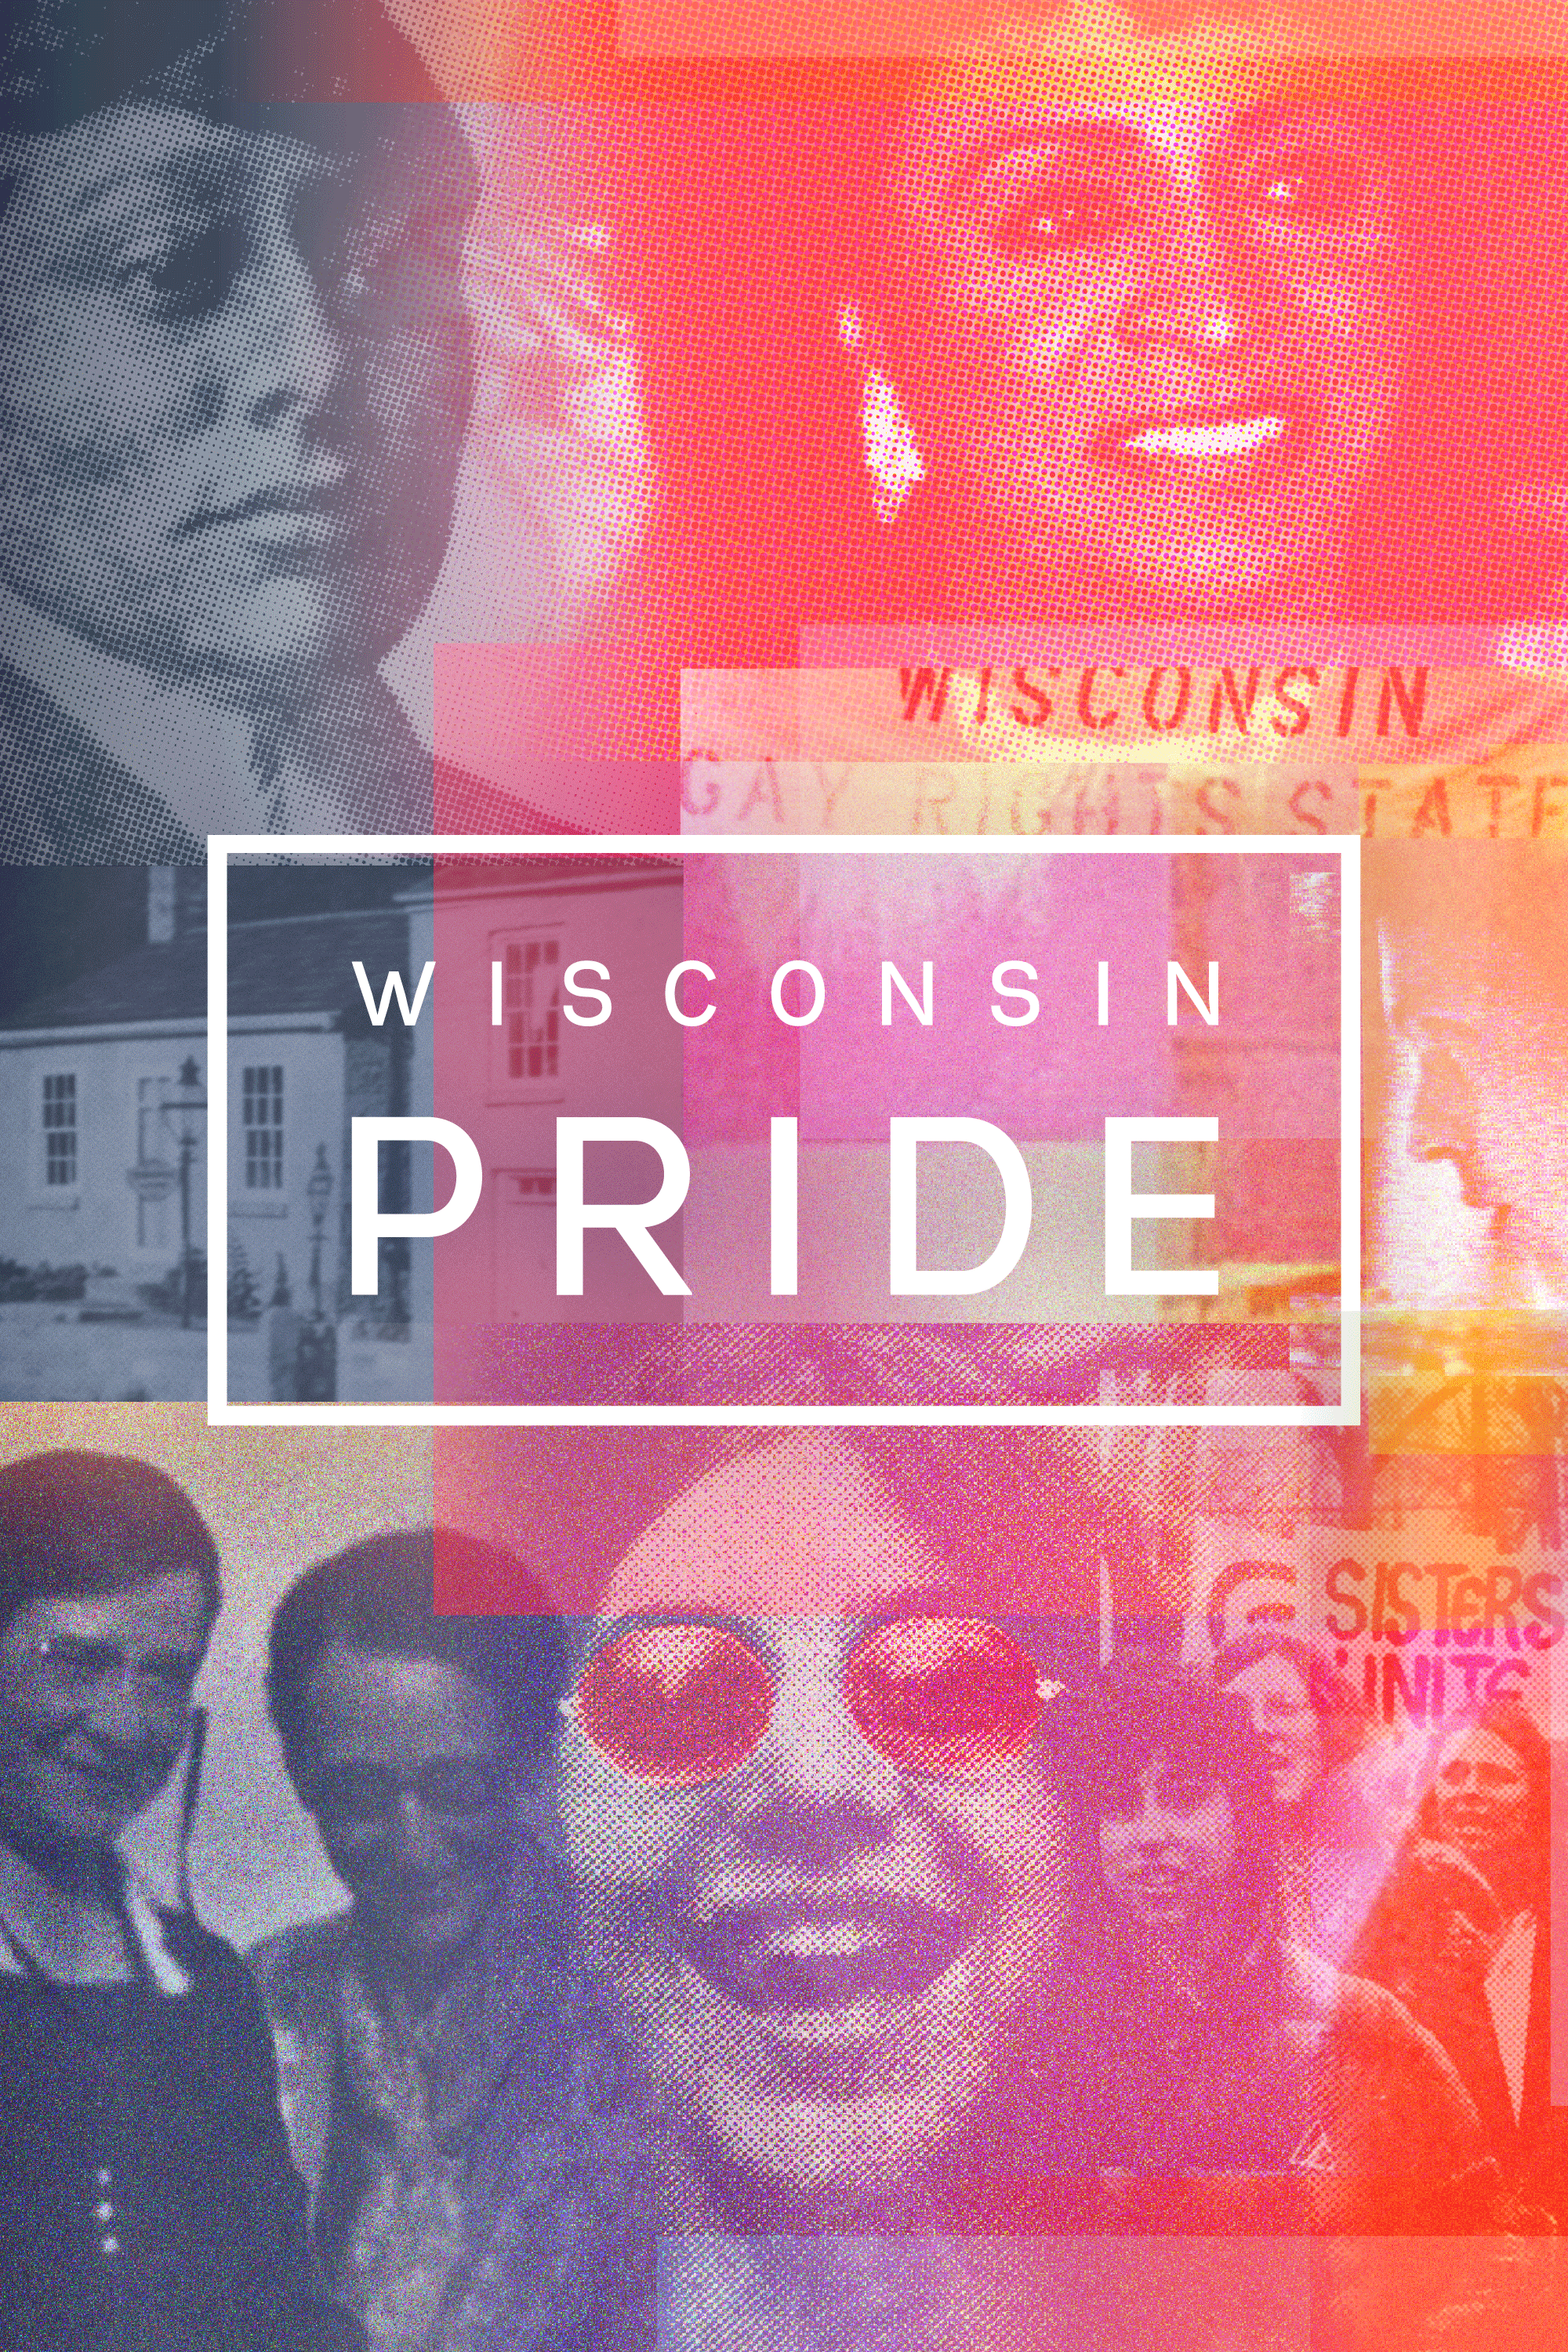 Collage of historical images related to Wisconsin LGBTQ+ . Text over the image reads "Wisconsin Pride."